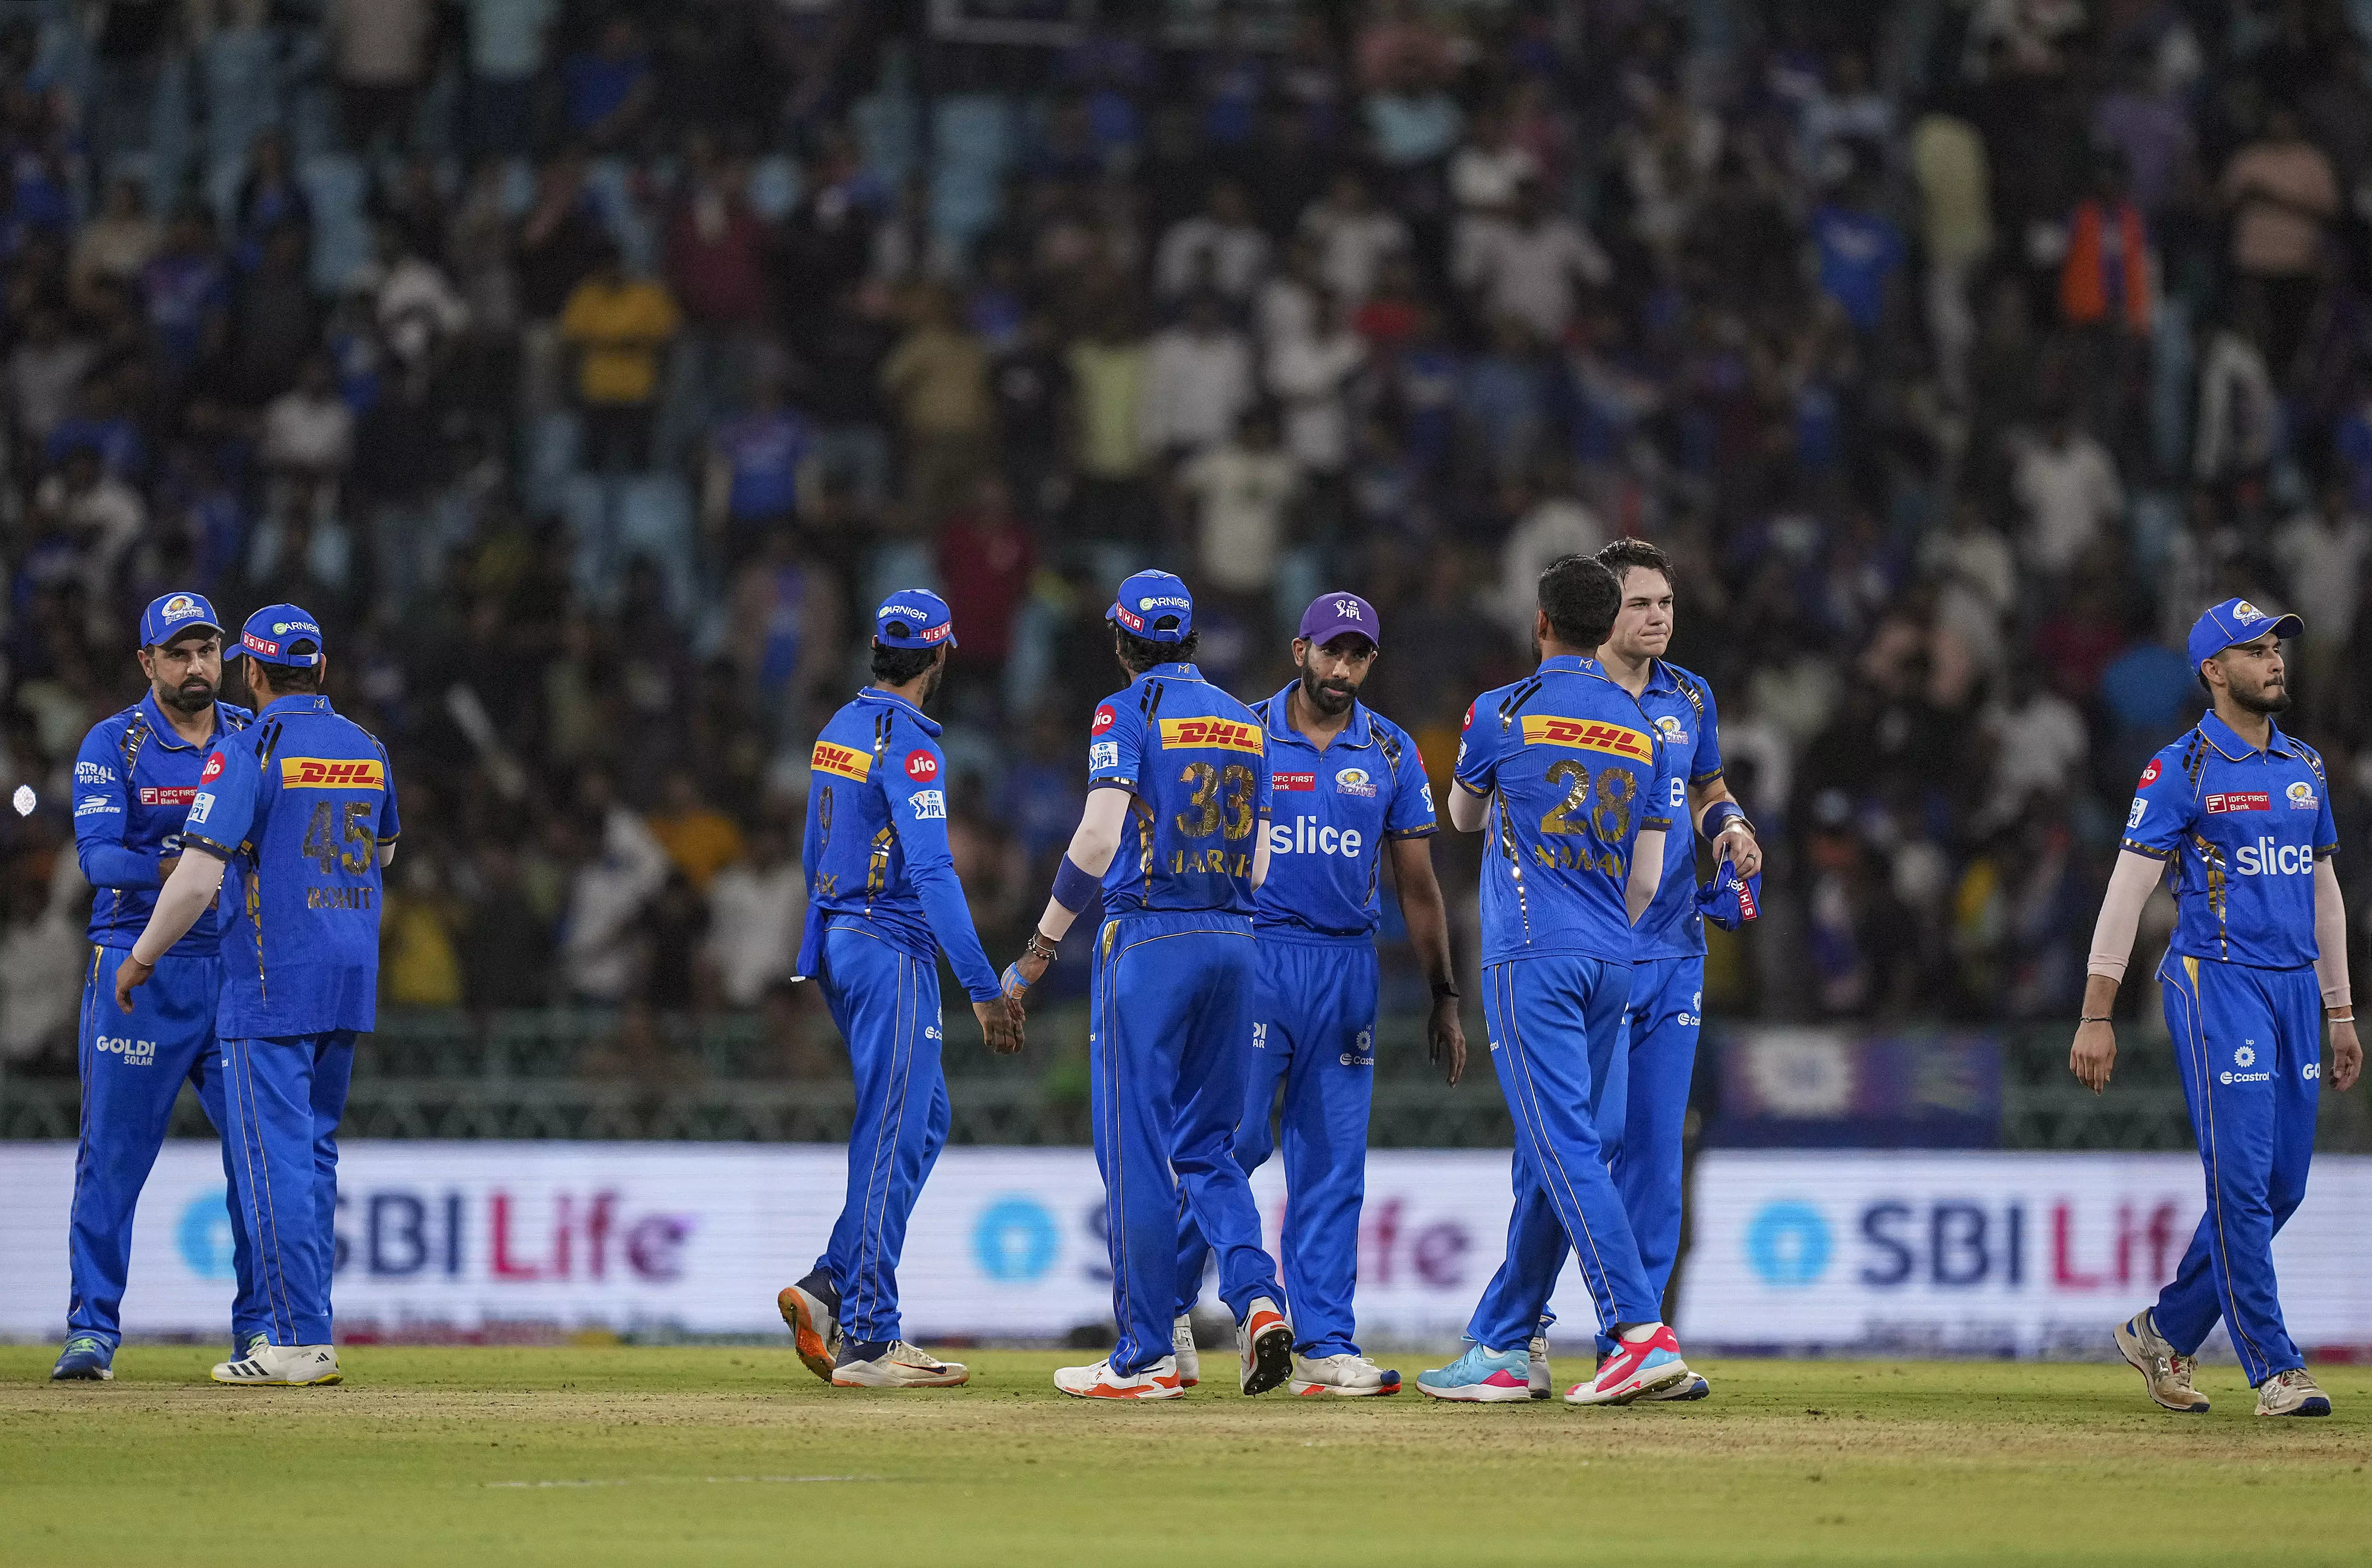 Pandya and all other MI players fined for slow over-rate offence in match against LSG